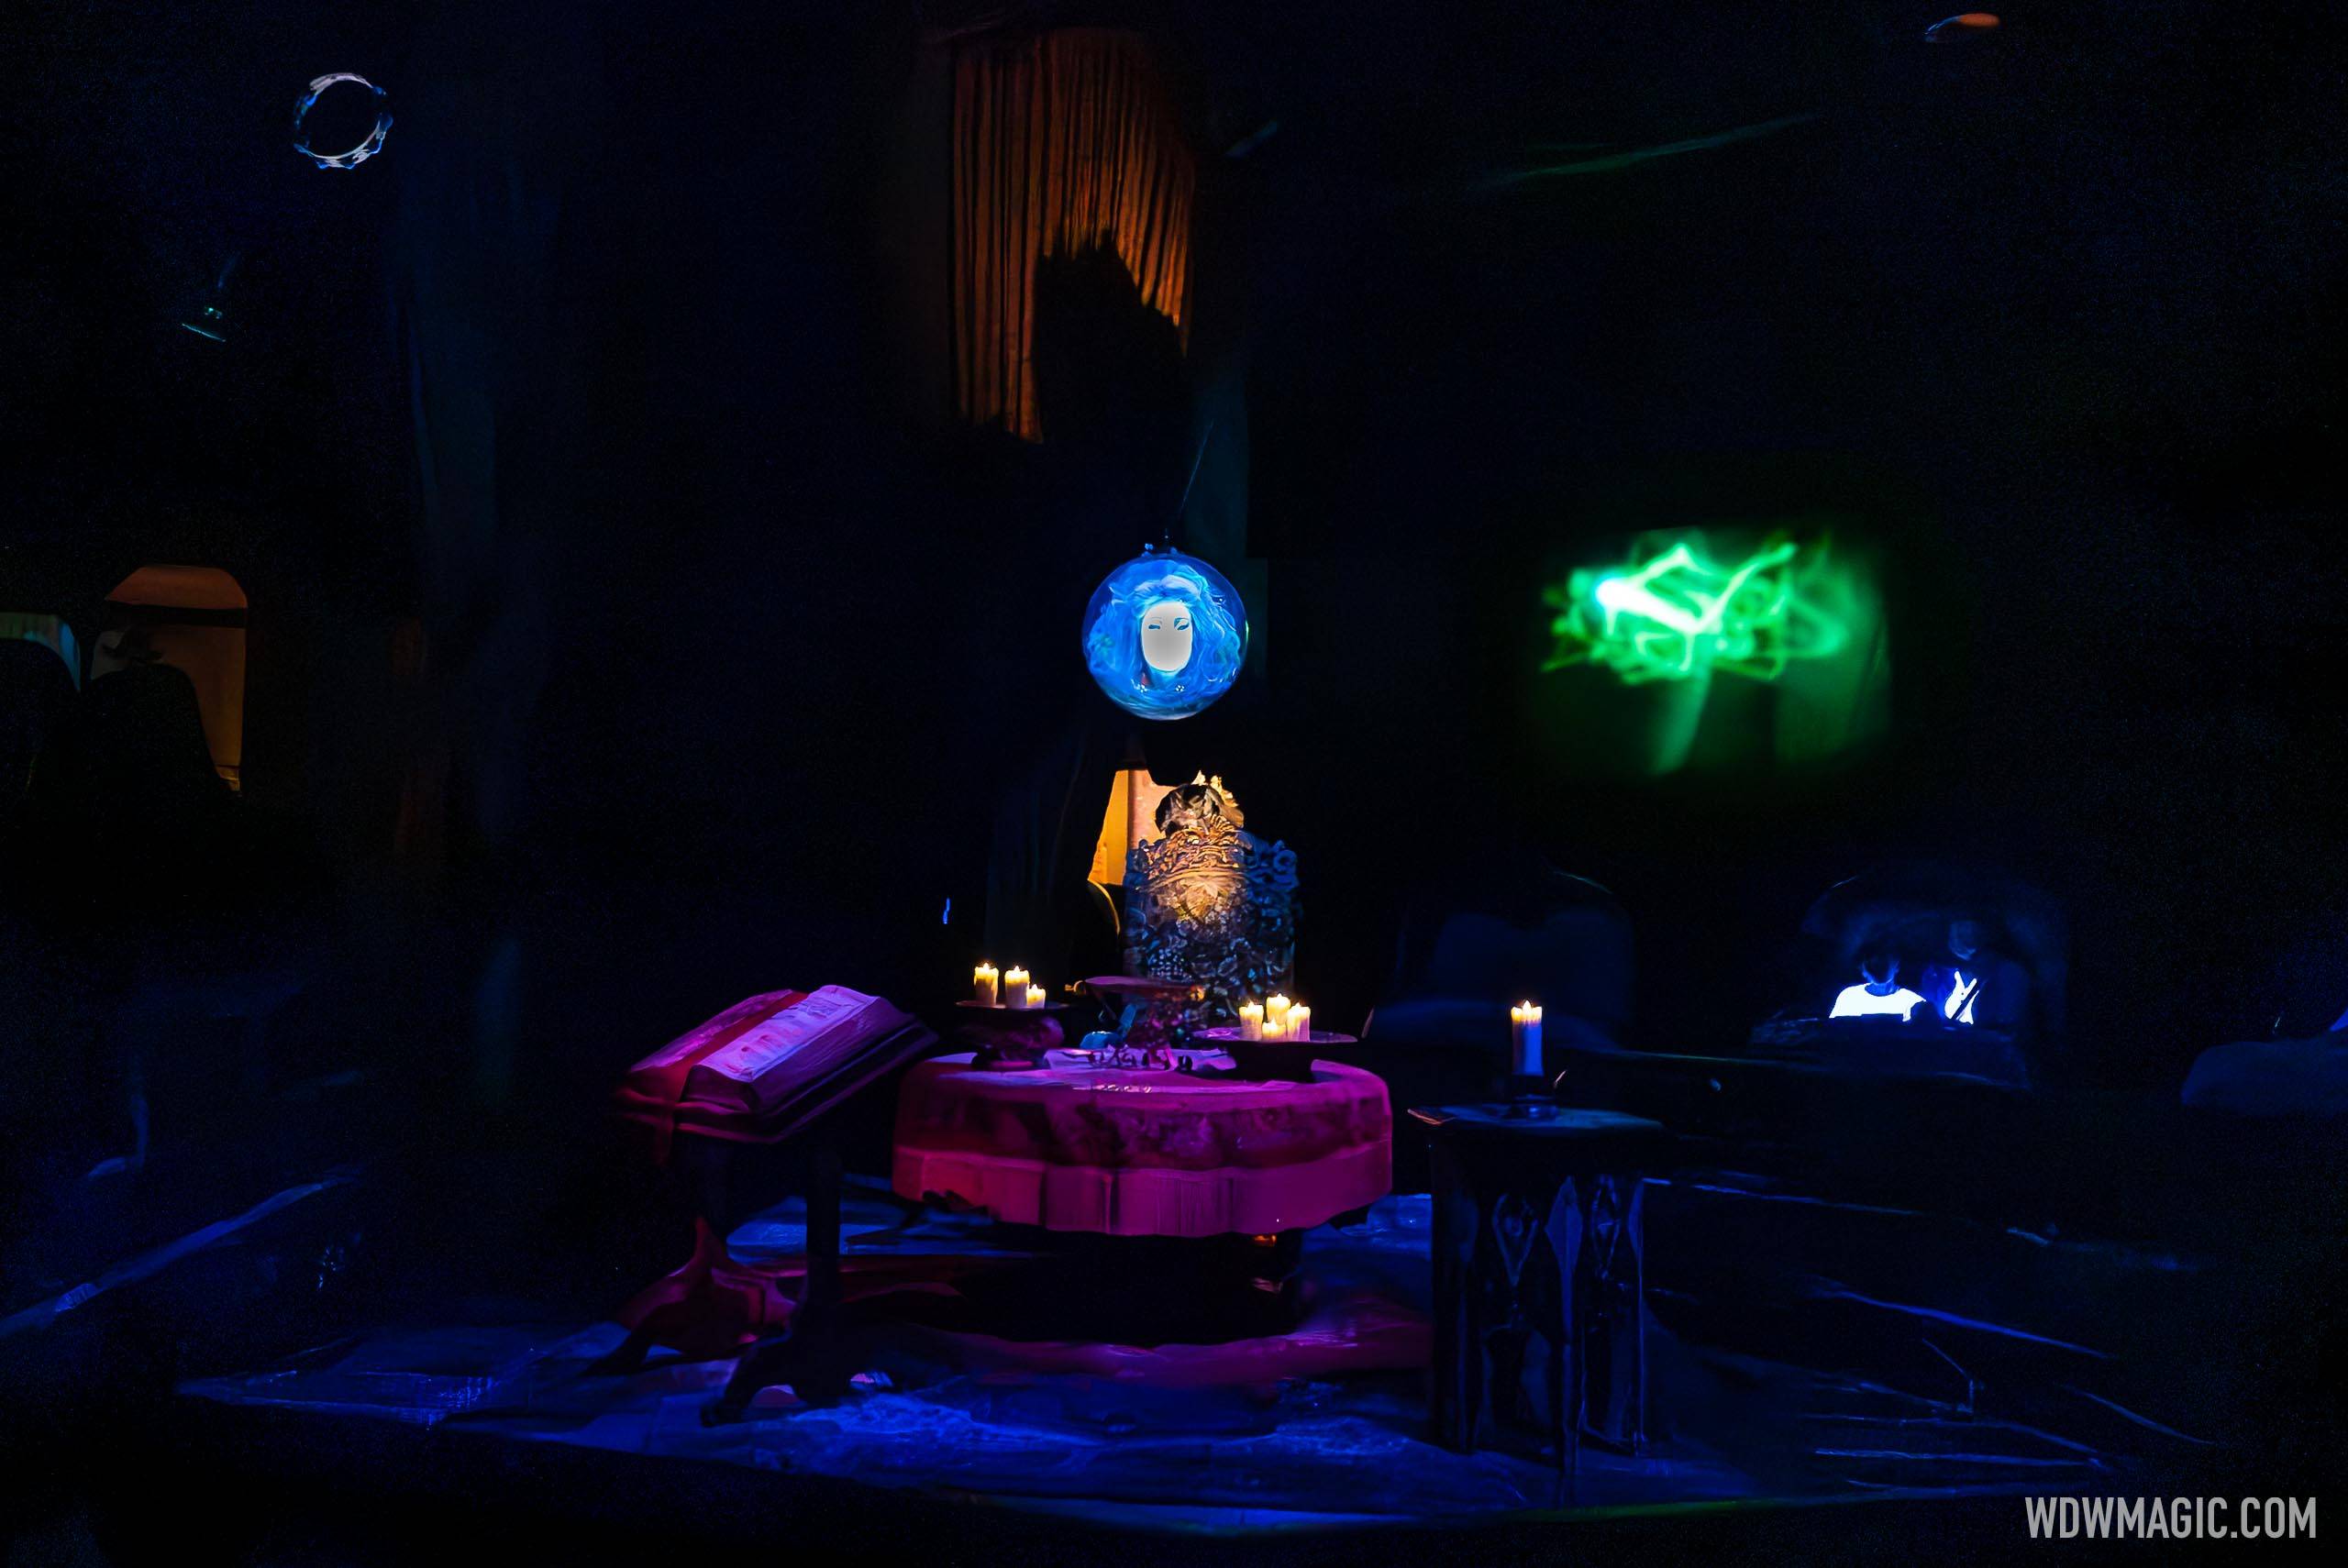 New unload projection effect at the Haunted Mansion